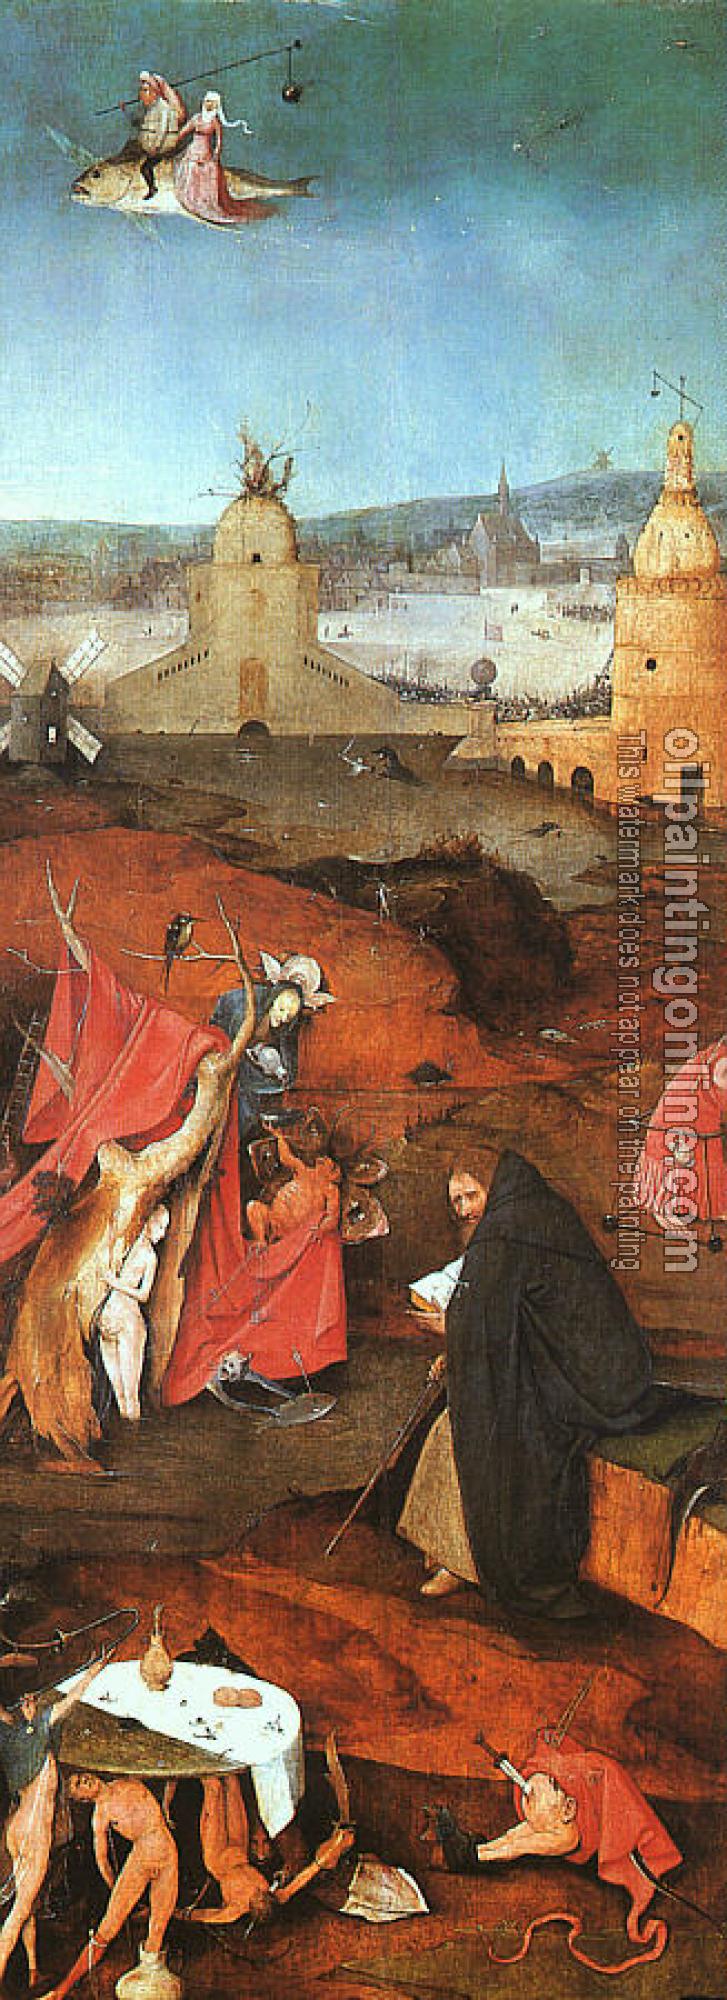 Bosch, Hieronymus - St. Anthony in Meditation, inner-right wing of the triptych The Temptation of St. Anthony